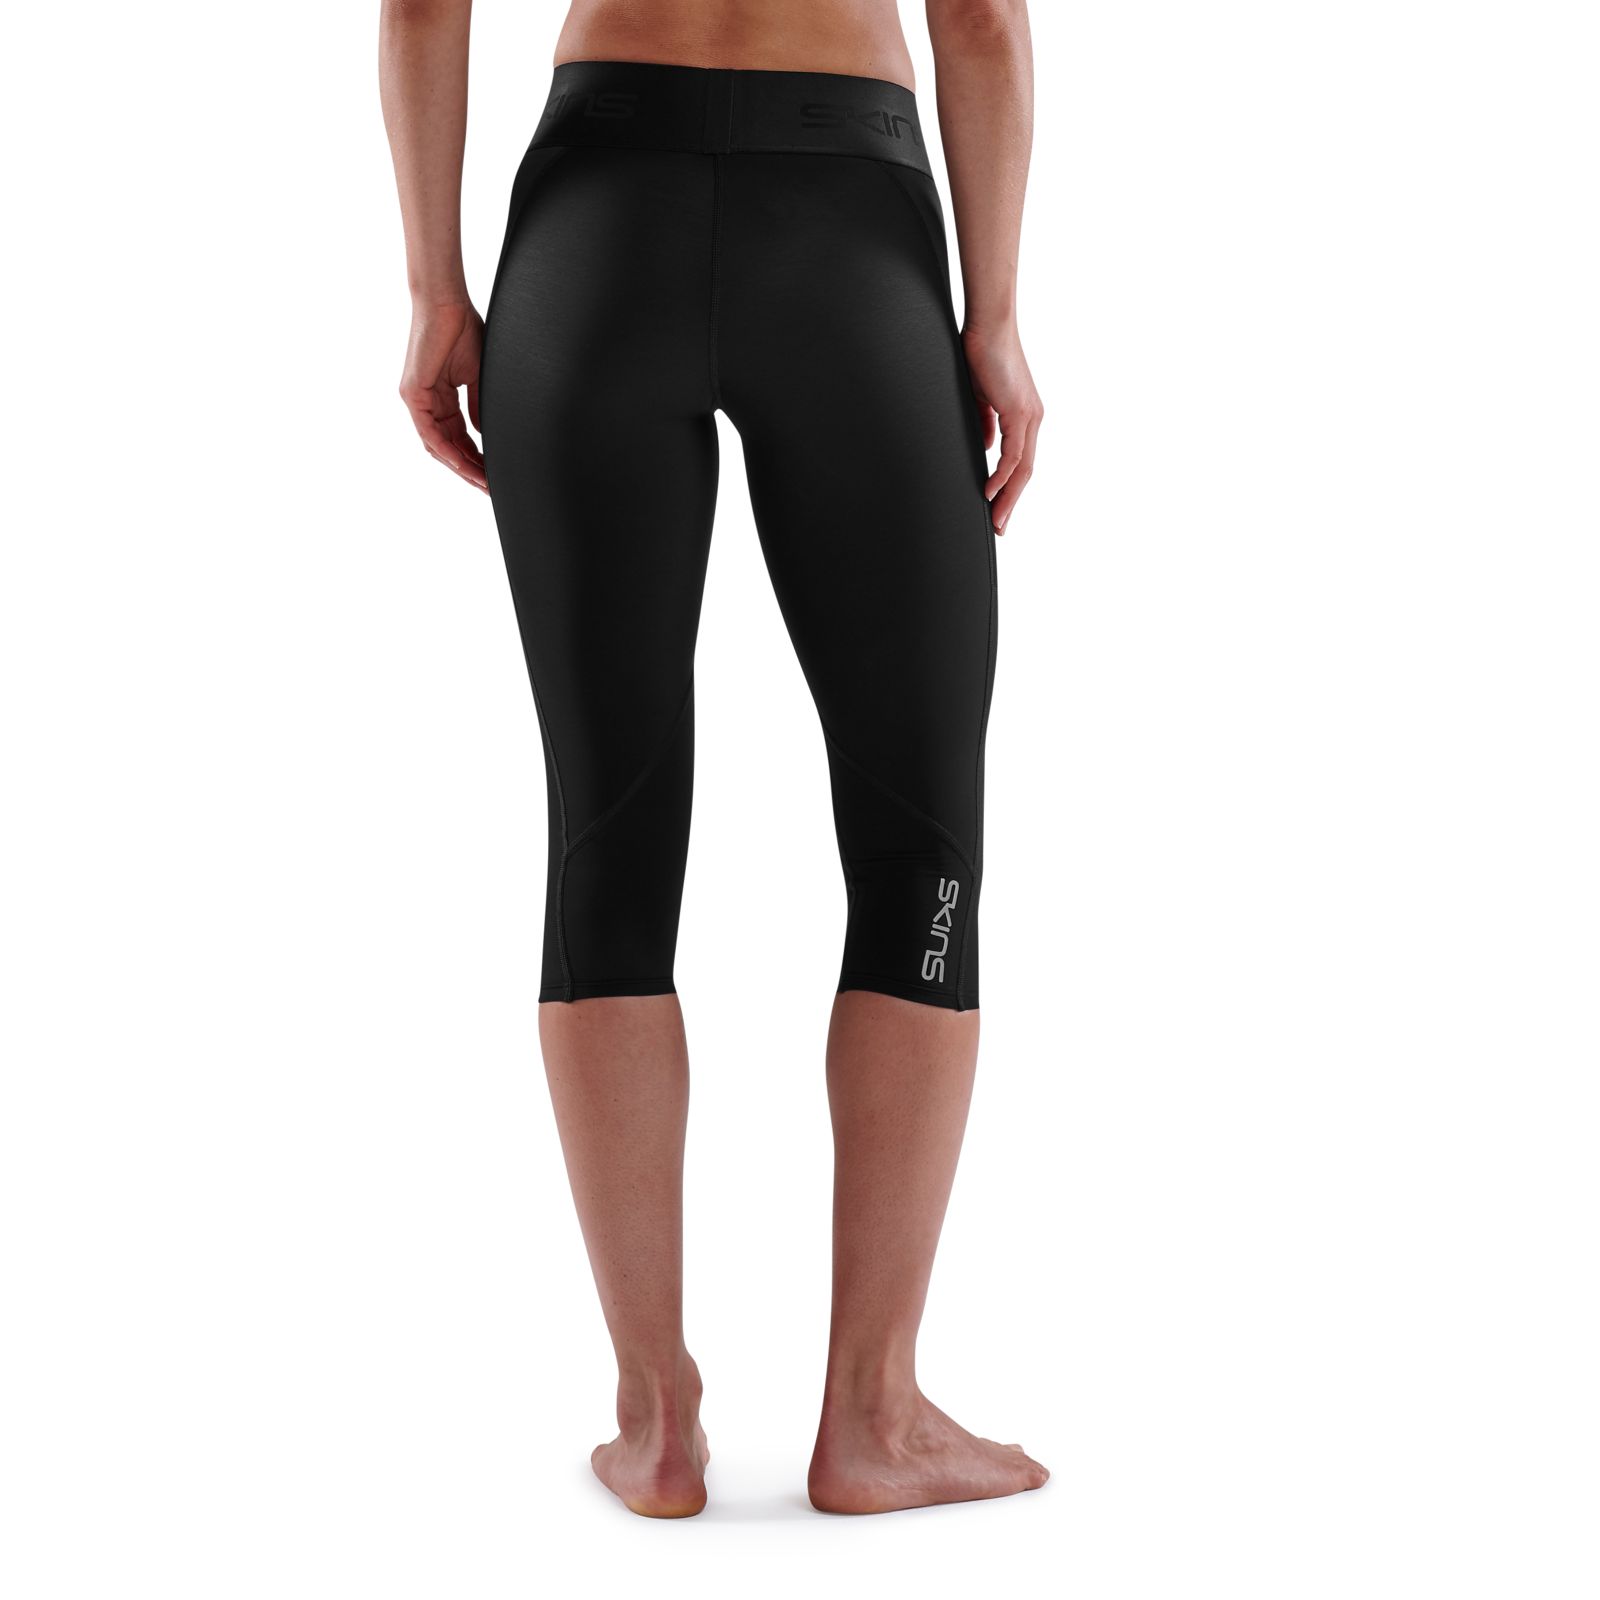 Skins A400 Womens Compression 3/4 Tights (Black/Gold) - Olympus Sports